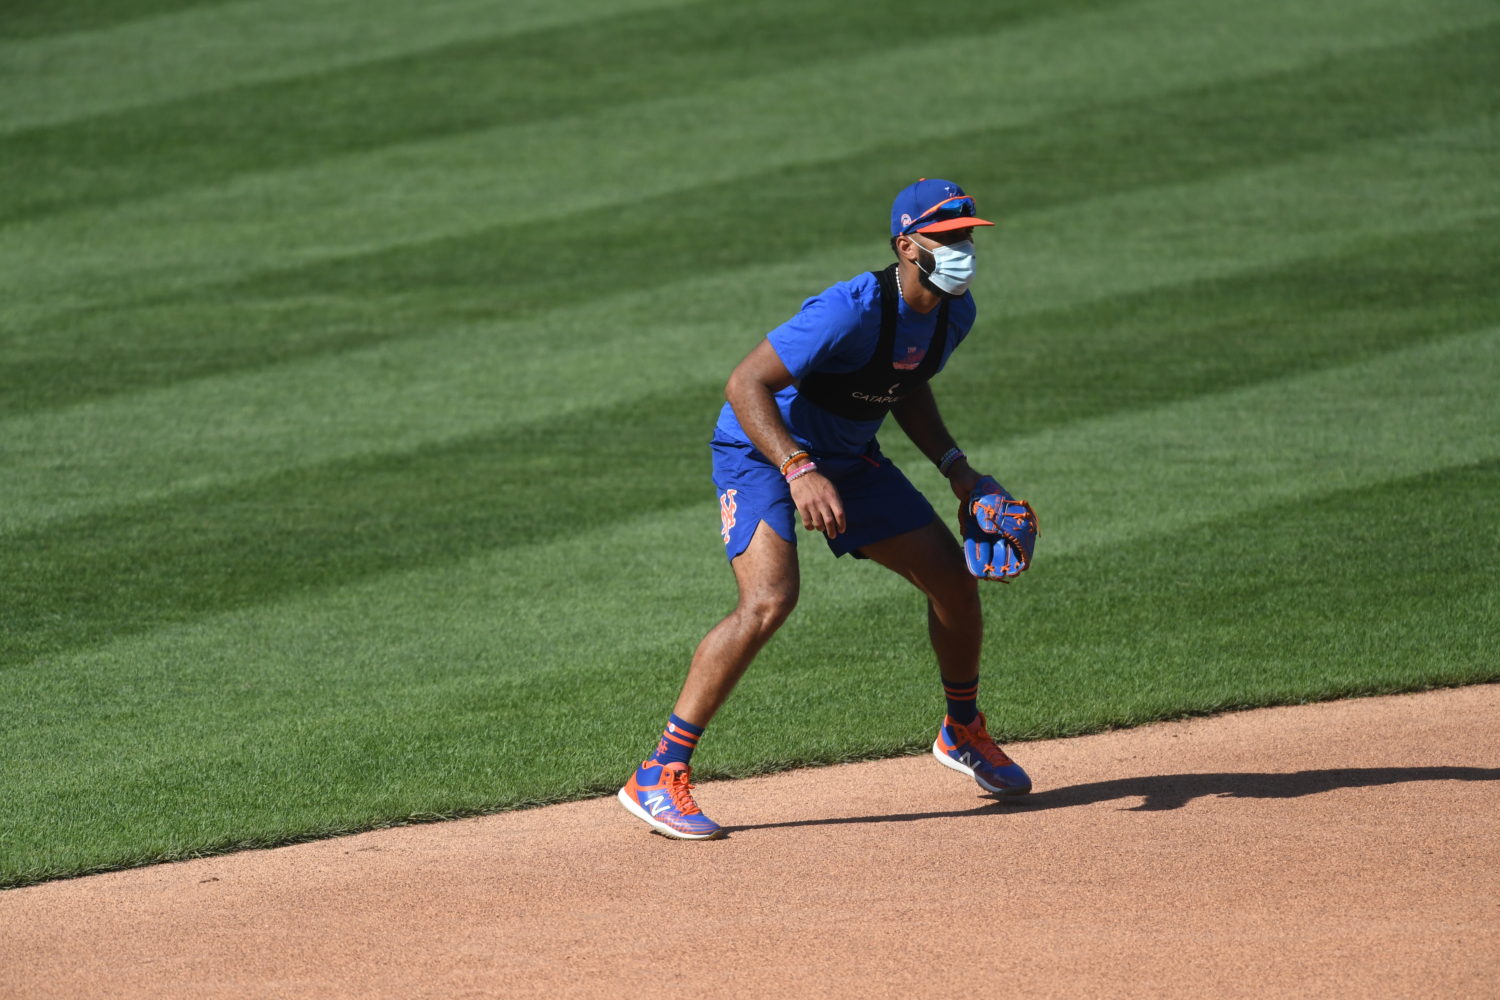 Amed Rosario Plays Wearing a Mask During COVID-19 Pandemic